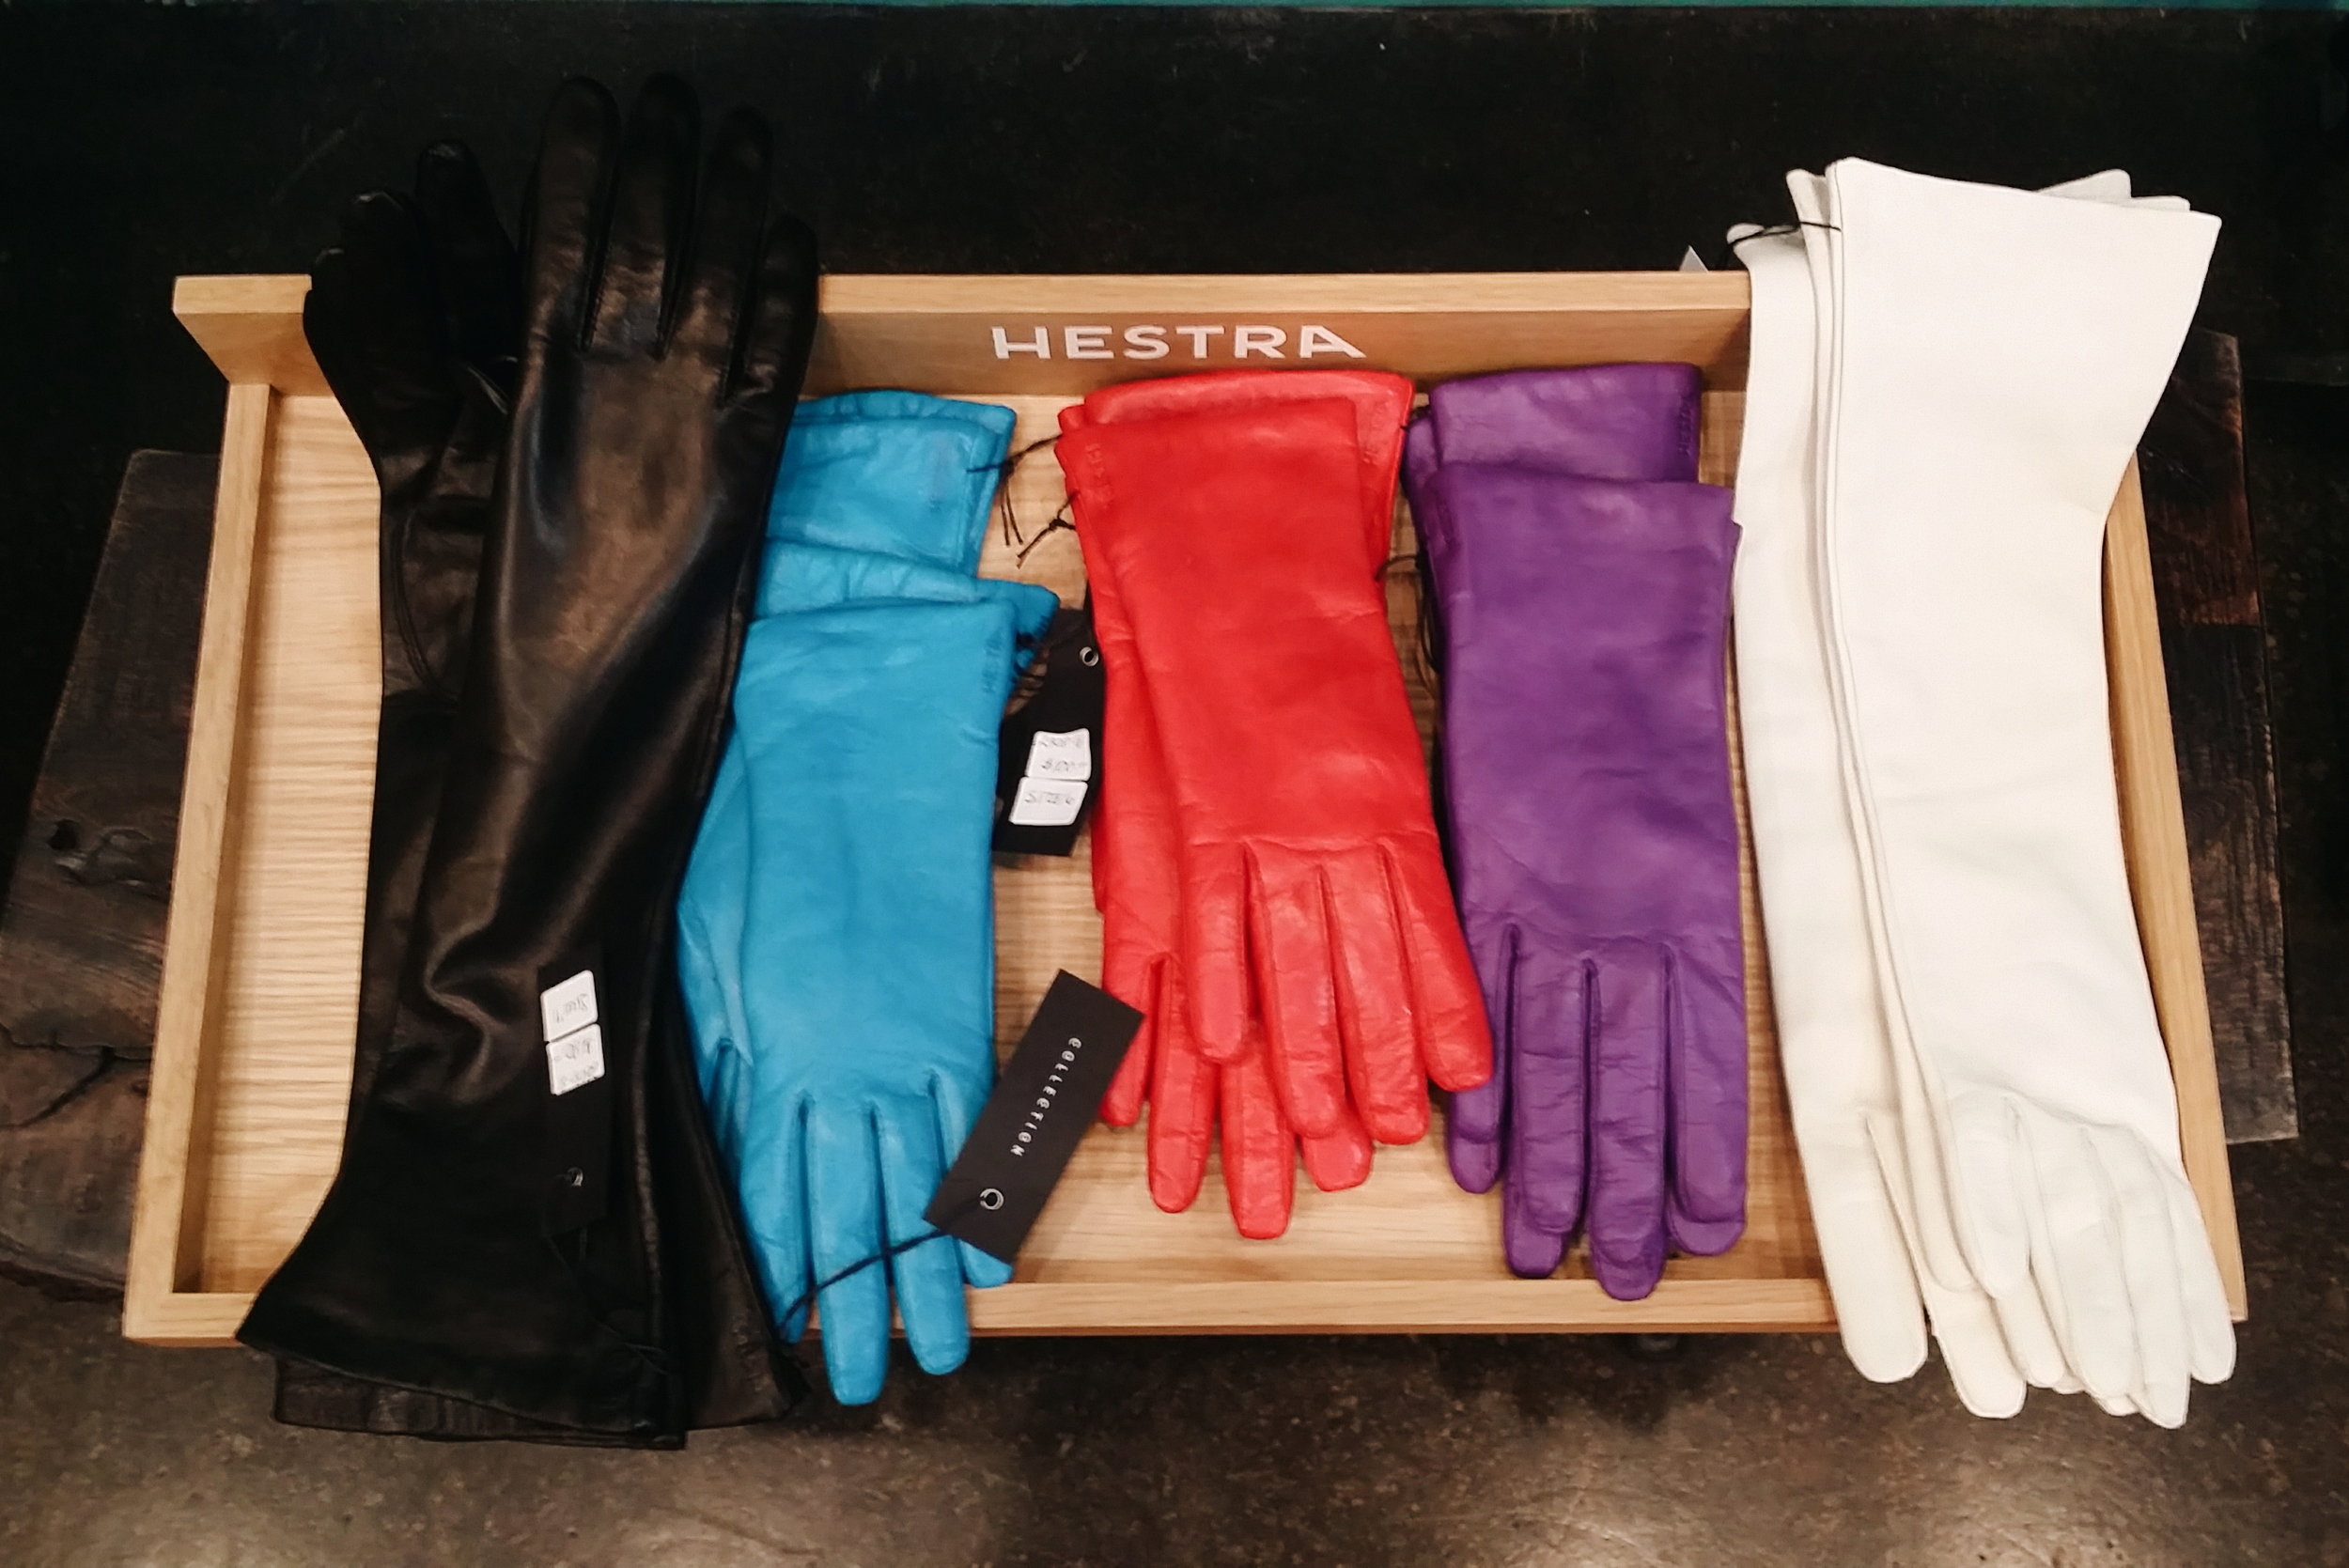  Hestra Leather Gloves: $100 for wrist-length, $180 for elbow-length 